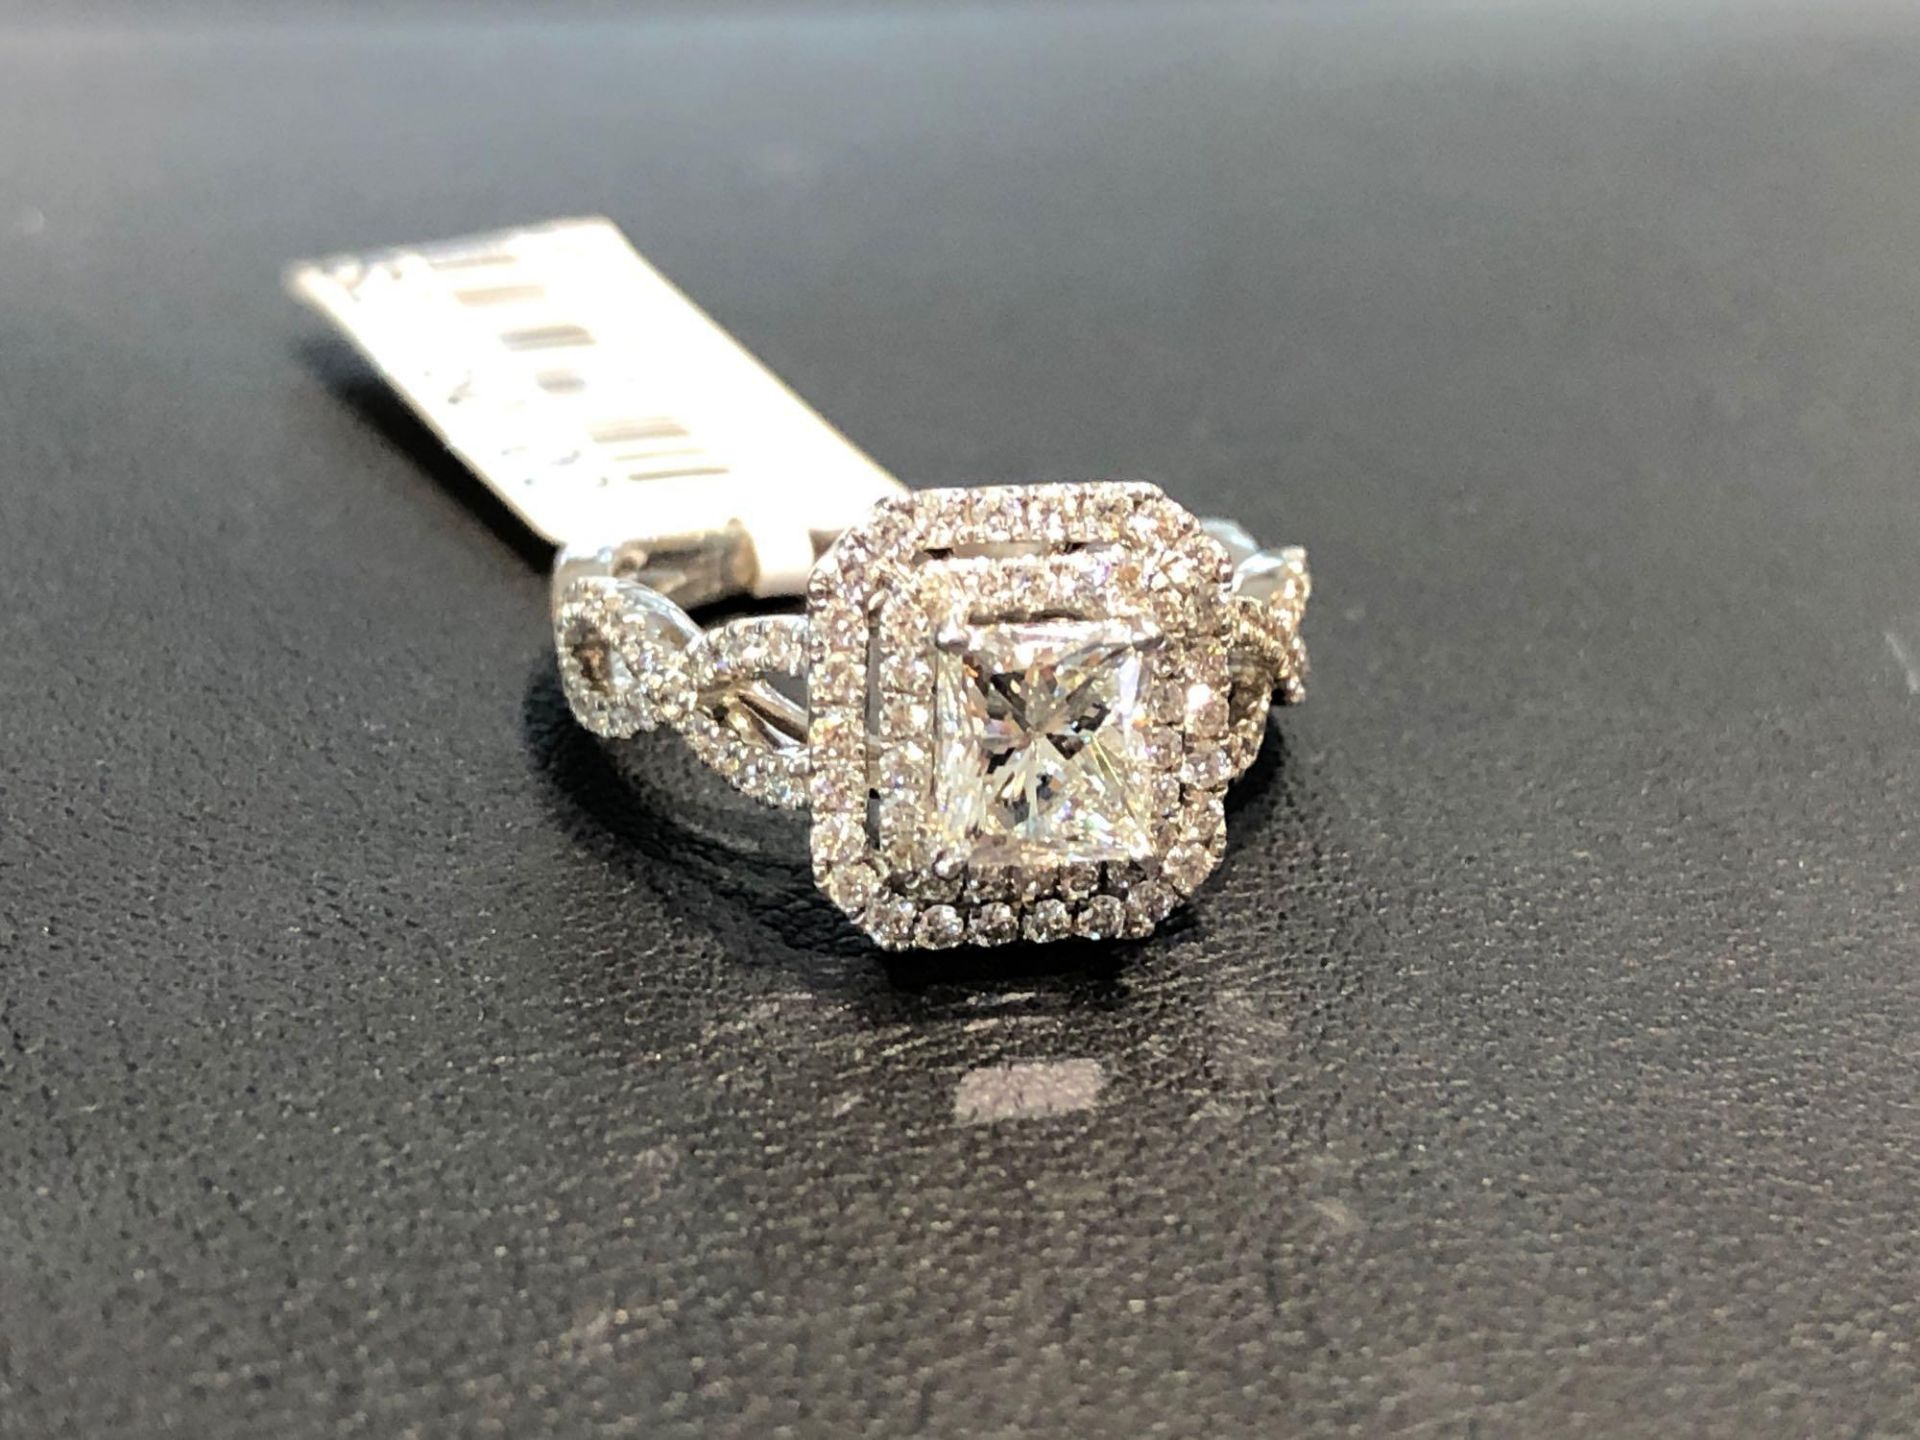 BEAUTIFUL 1.05CT PRINCESS CUT CENTER DIAMOND, GIA CERTIFIED J COLOR VS1 CLARITY, WITH .50CT SIDE DIA